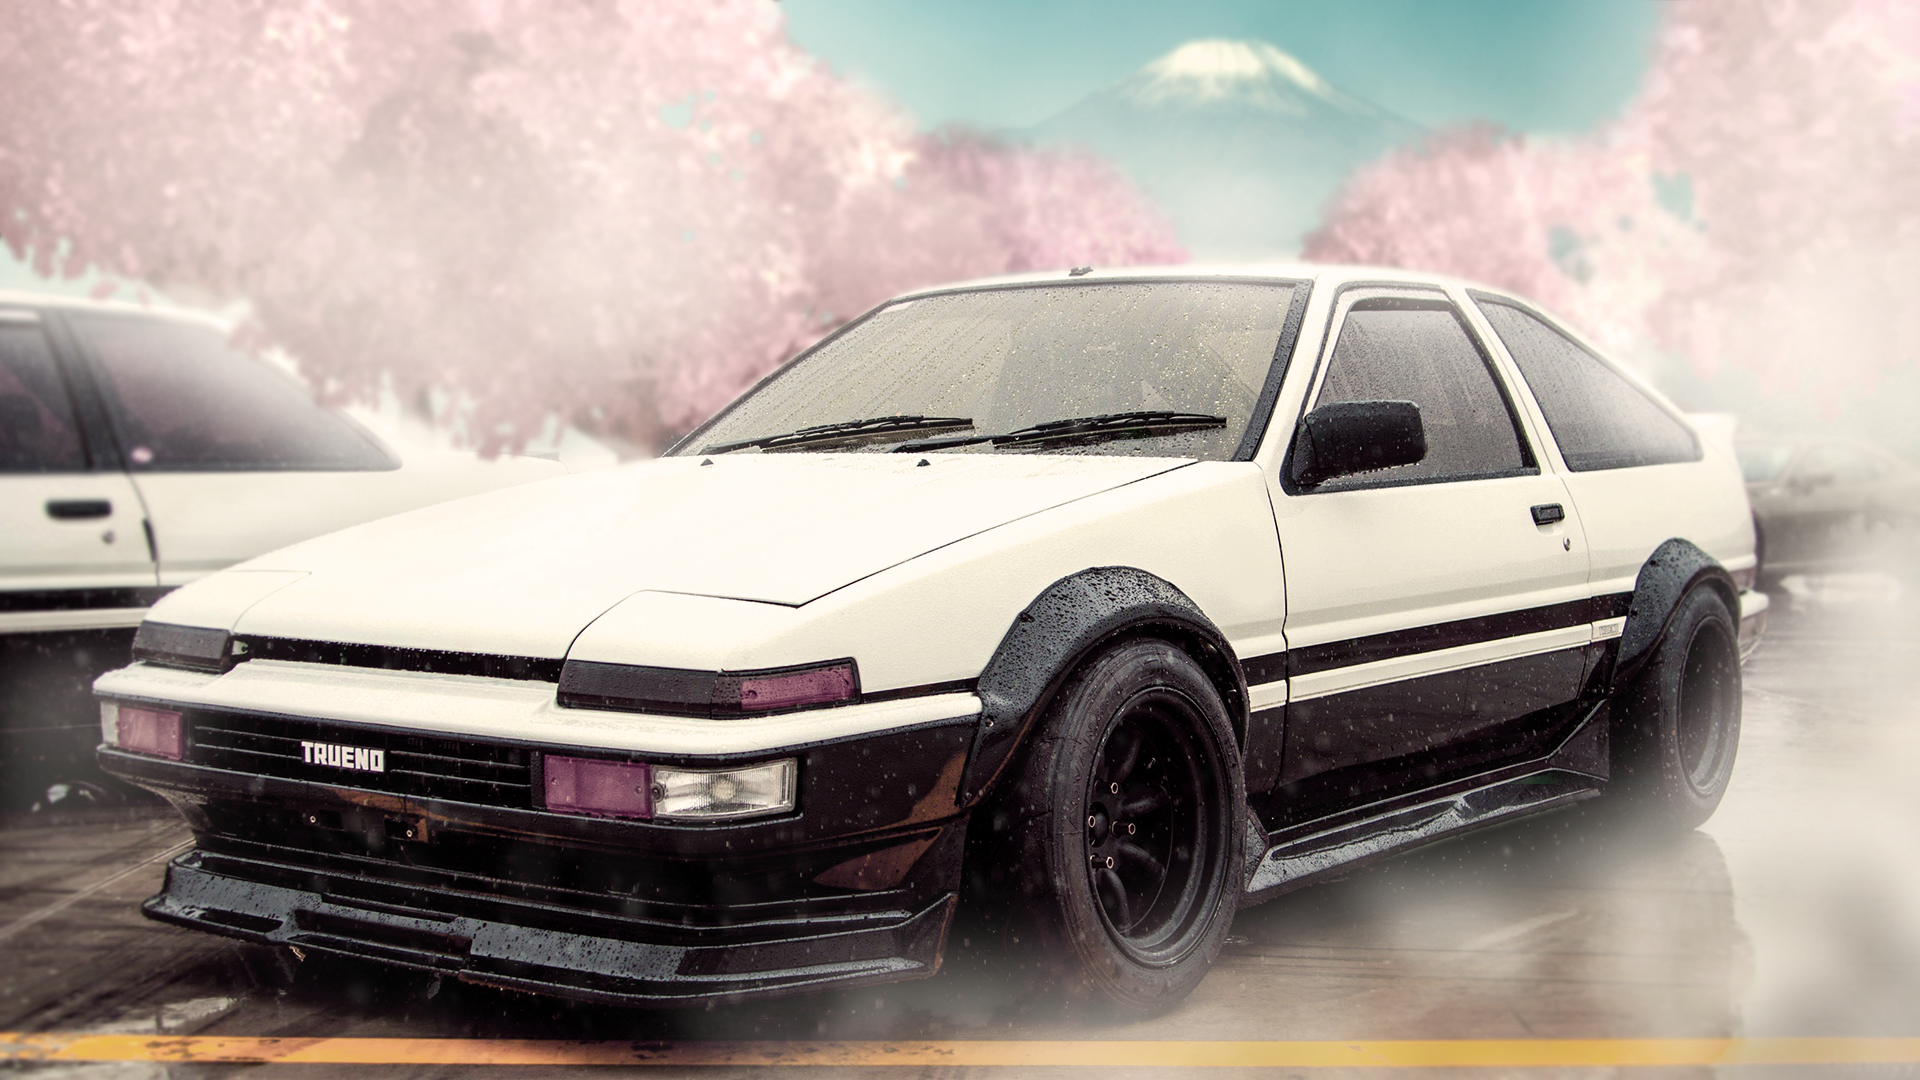 AE86 wallpaper i made for my computer, not very good but it was my first attempt at photohop